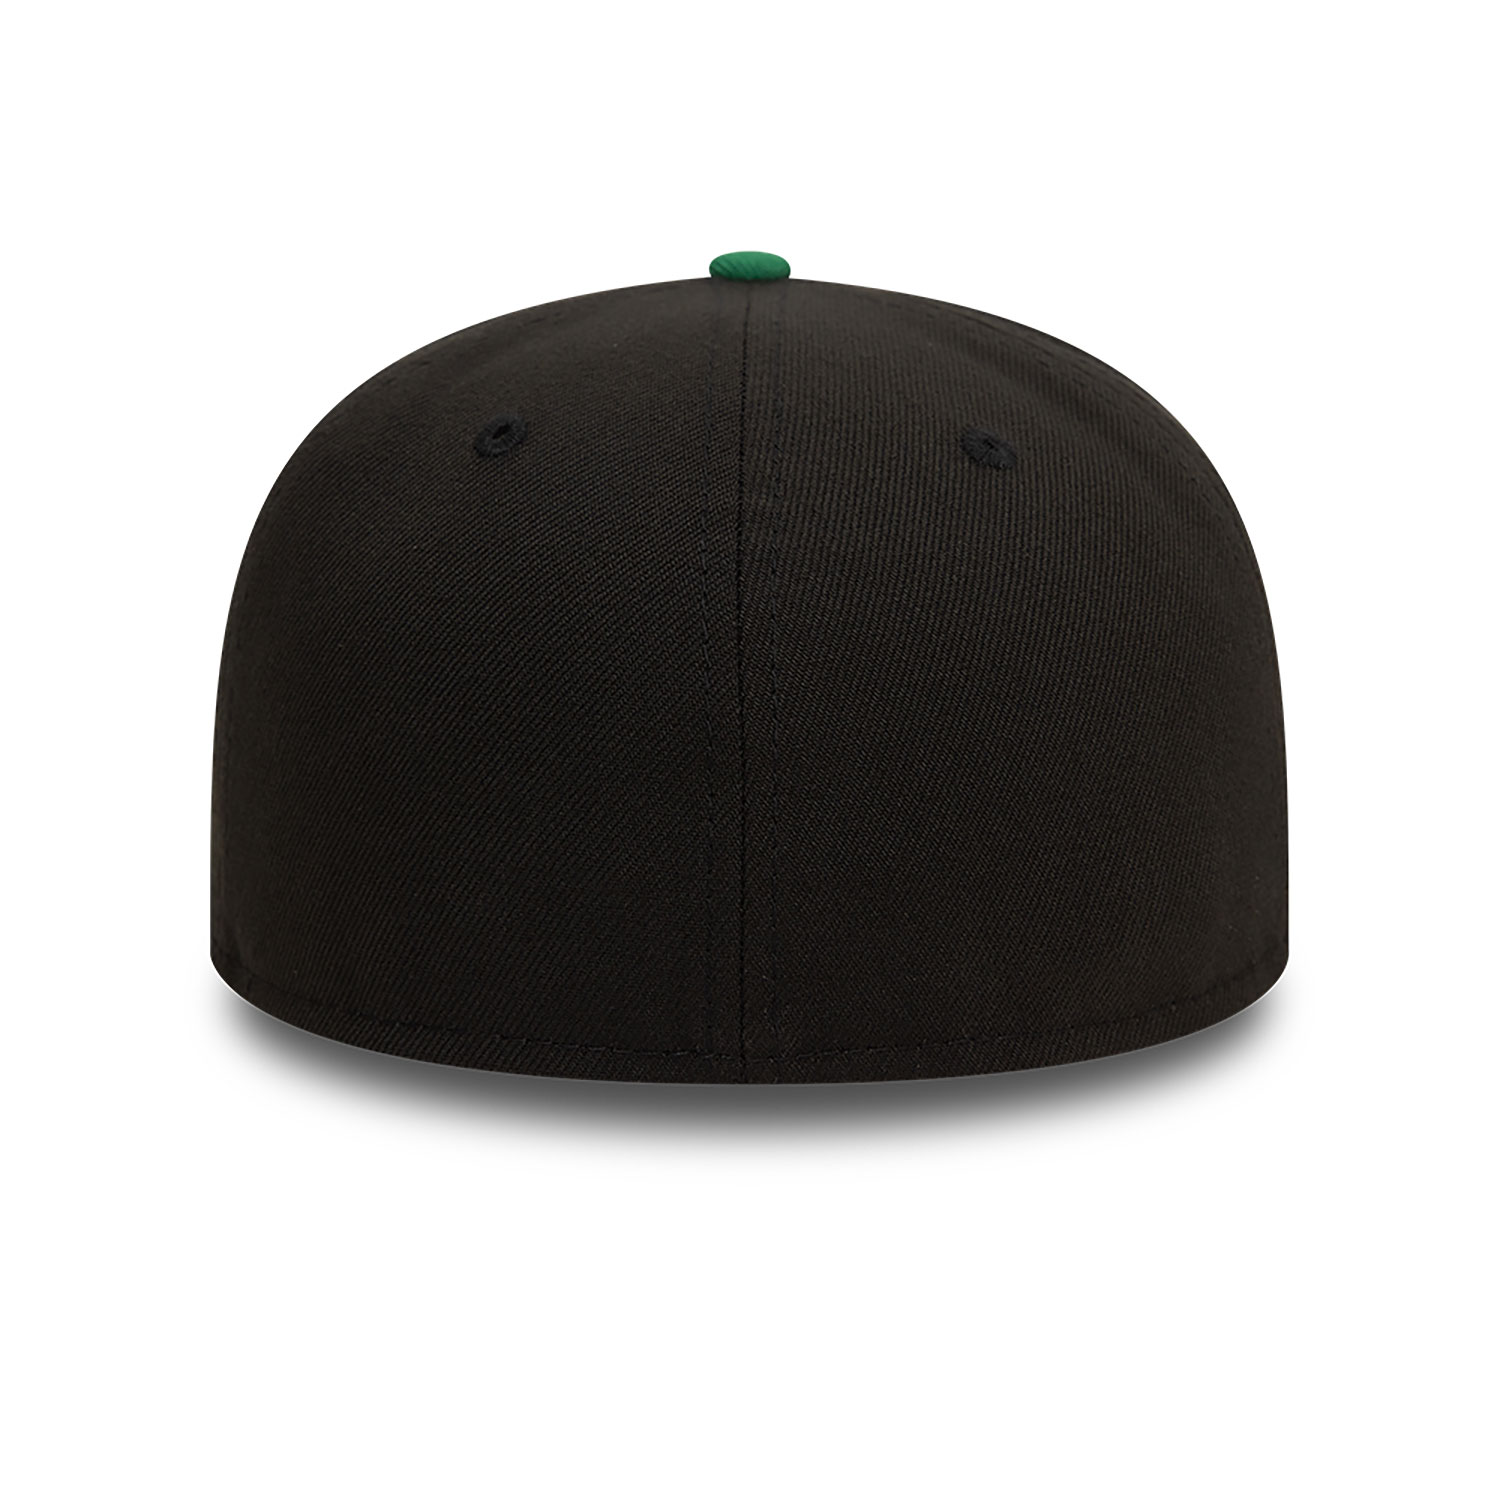 New Era Contrast Crown Black and Green 59FIFTY Fitted Cap